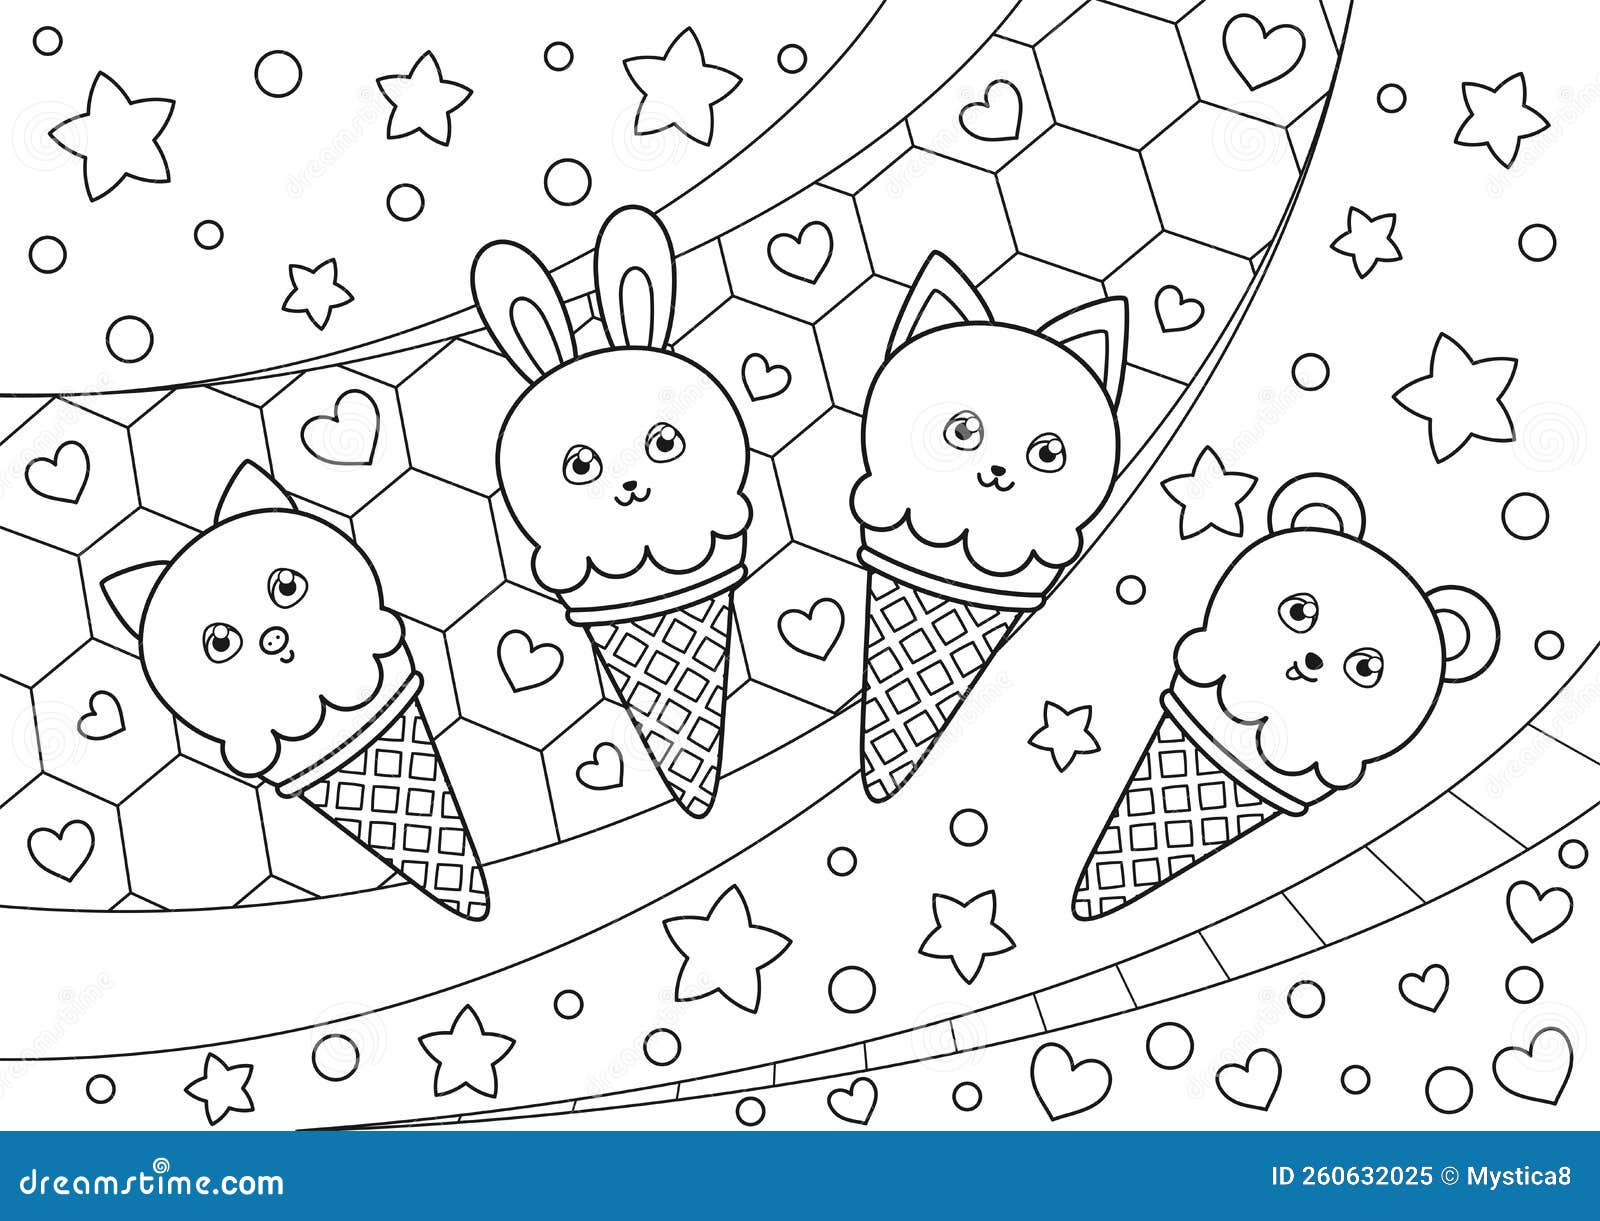 Coloring Page with Ice Cream Cones Characters in the Form of Kawaii ...